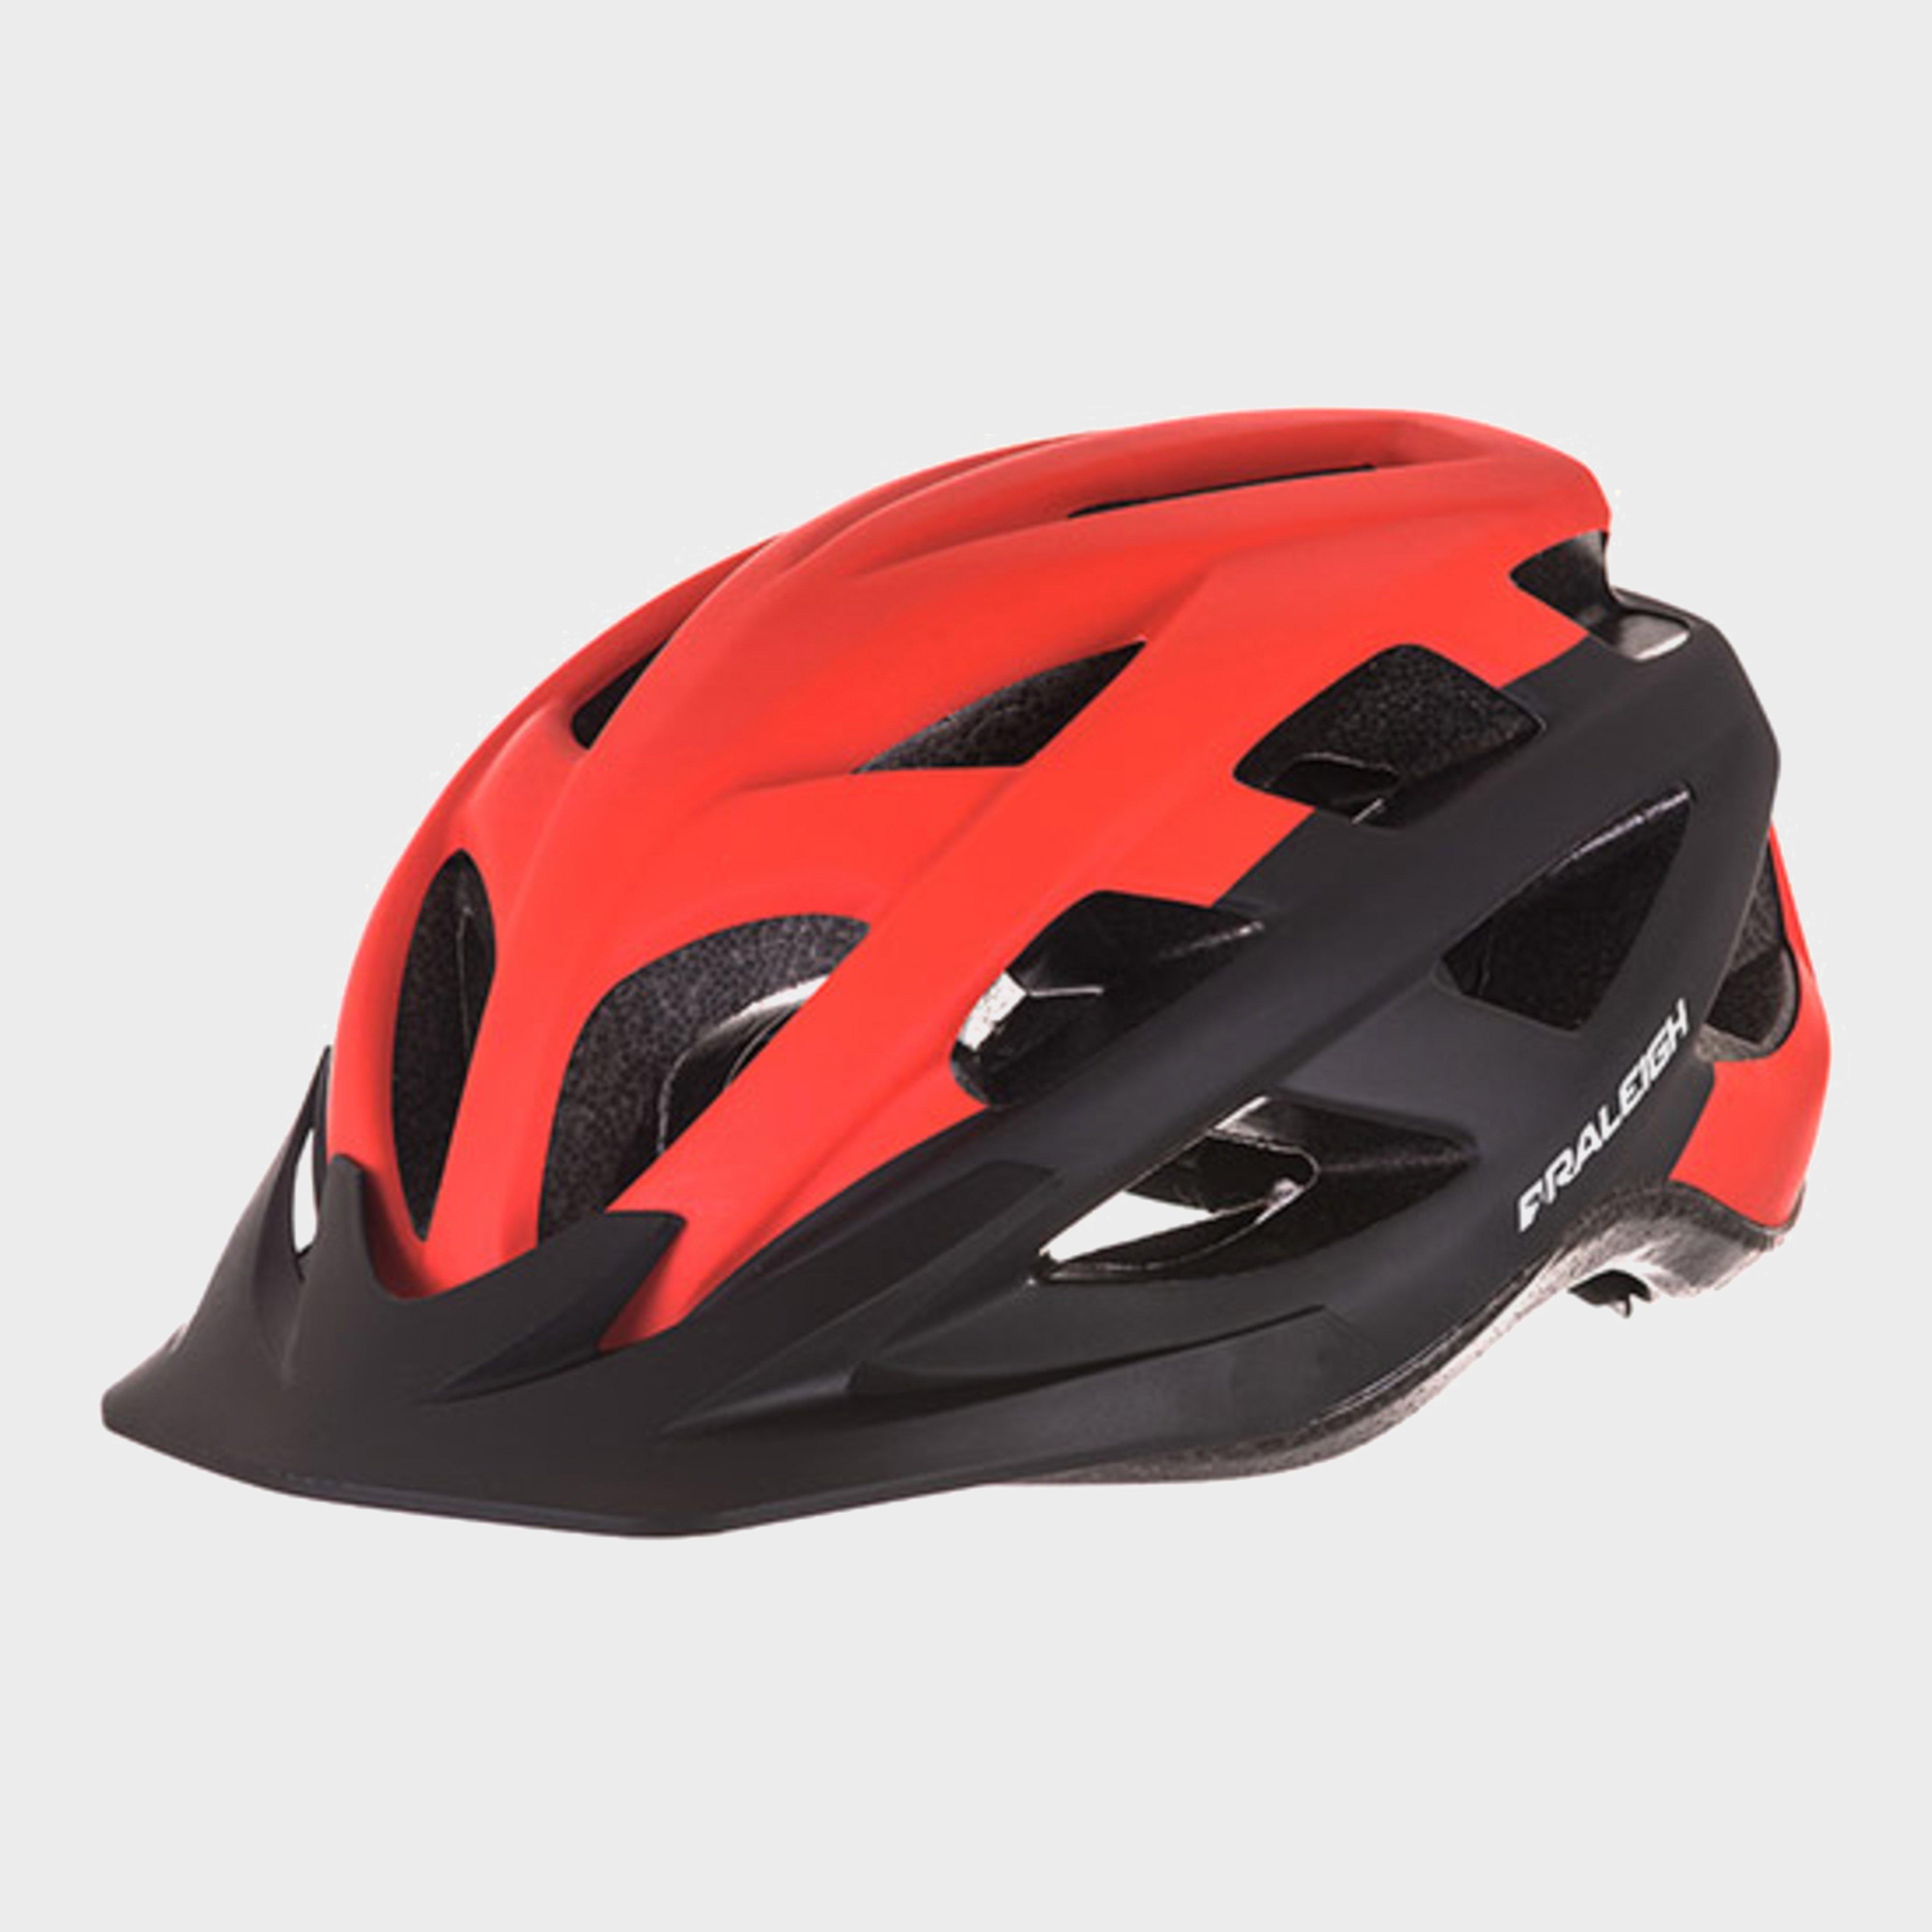 Image of Raleigh Quest Cycling Helmet - Red/Black, RED/BLACK